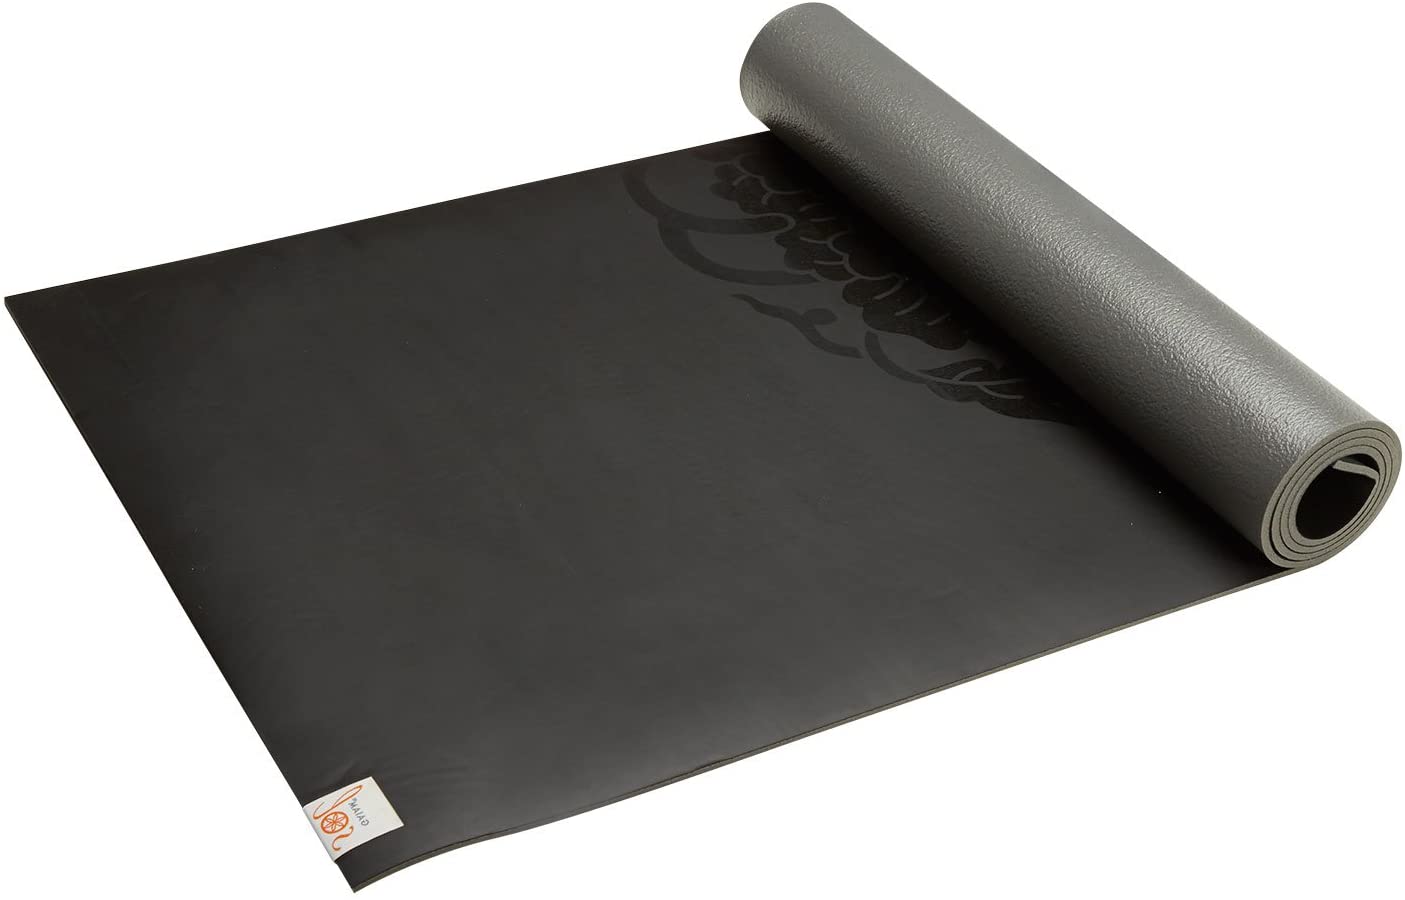 FLXBL Travel Yoga Mat and Luxury Top Layer in One Non Slip and